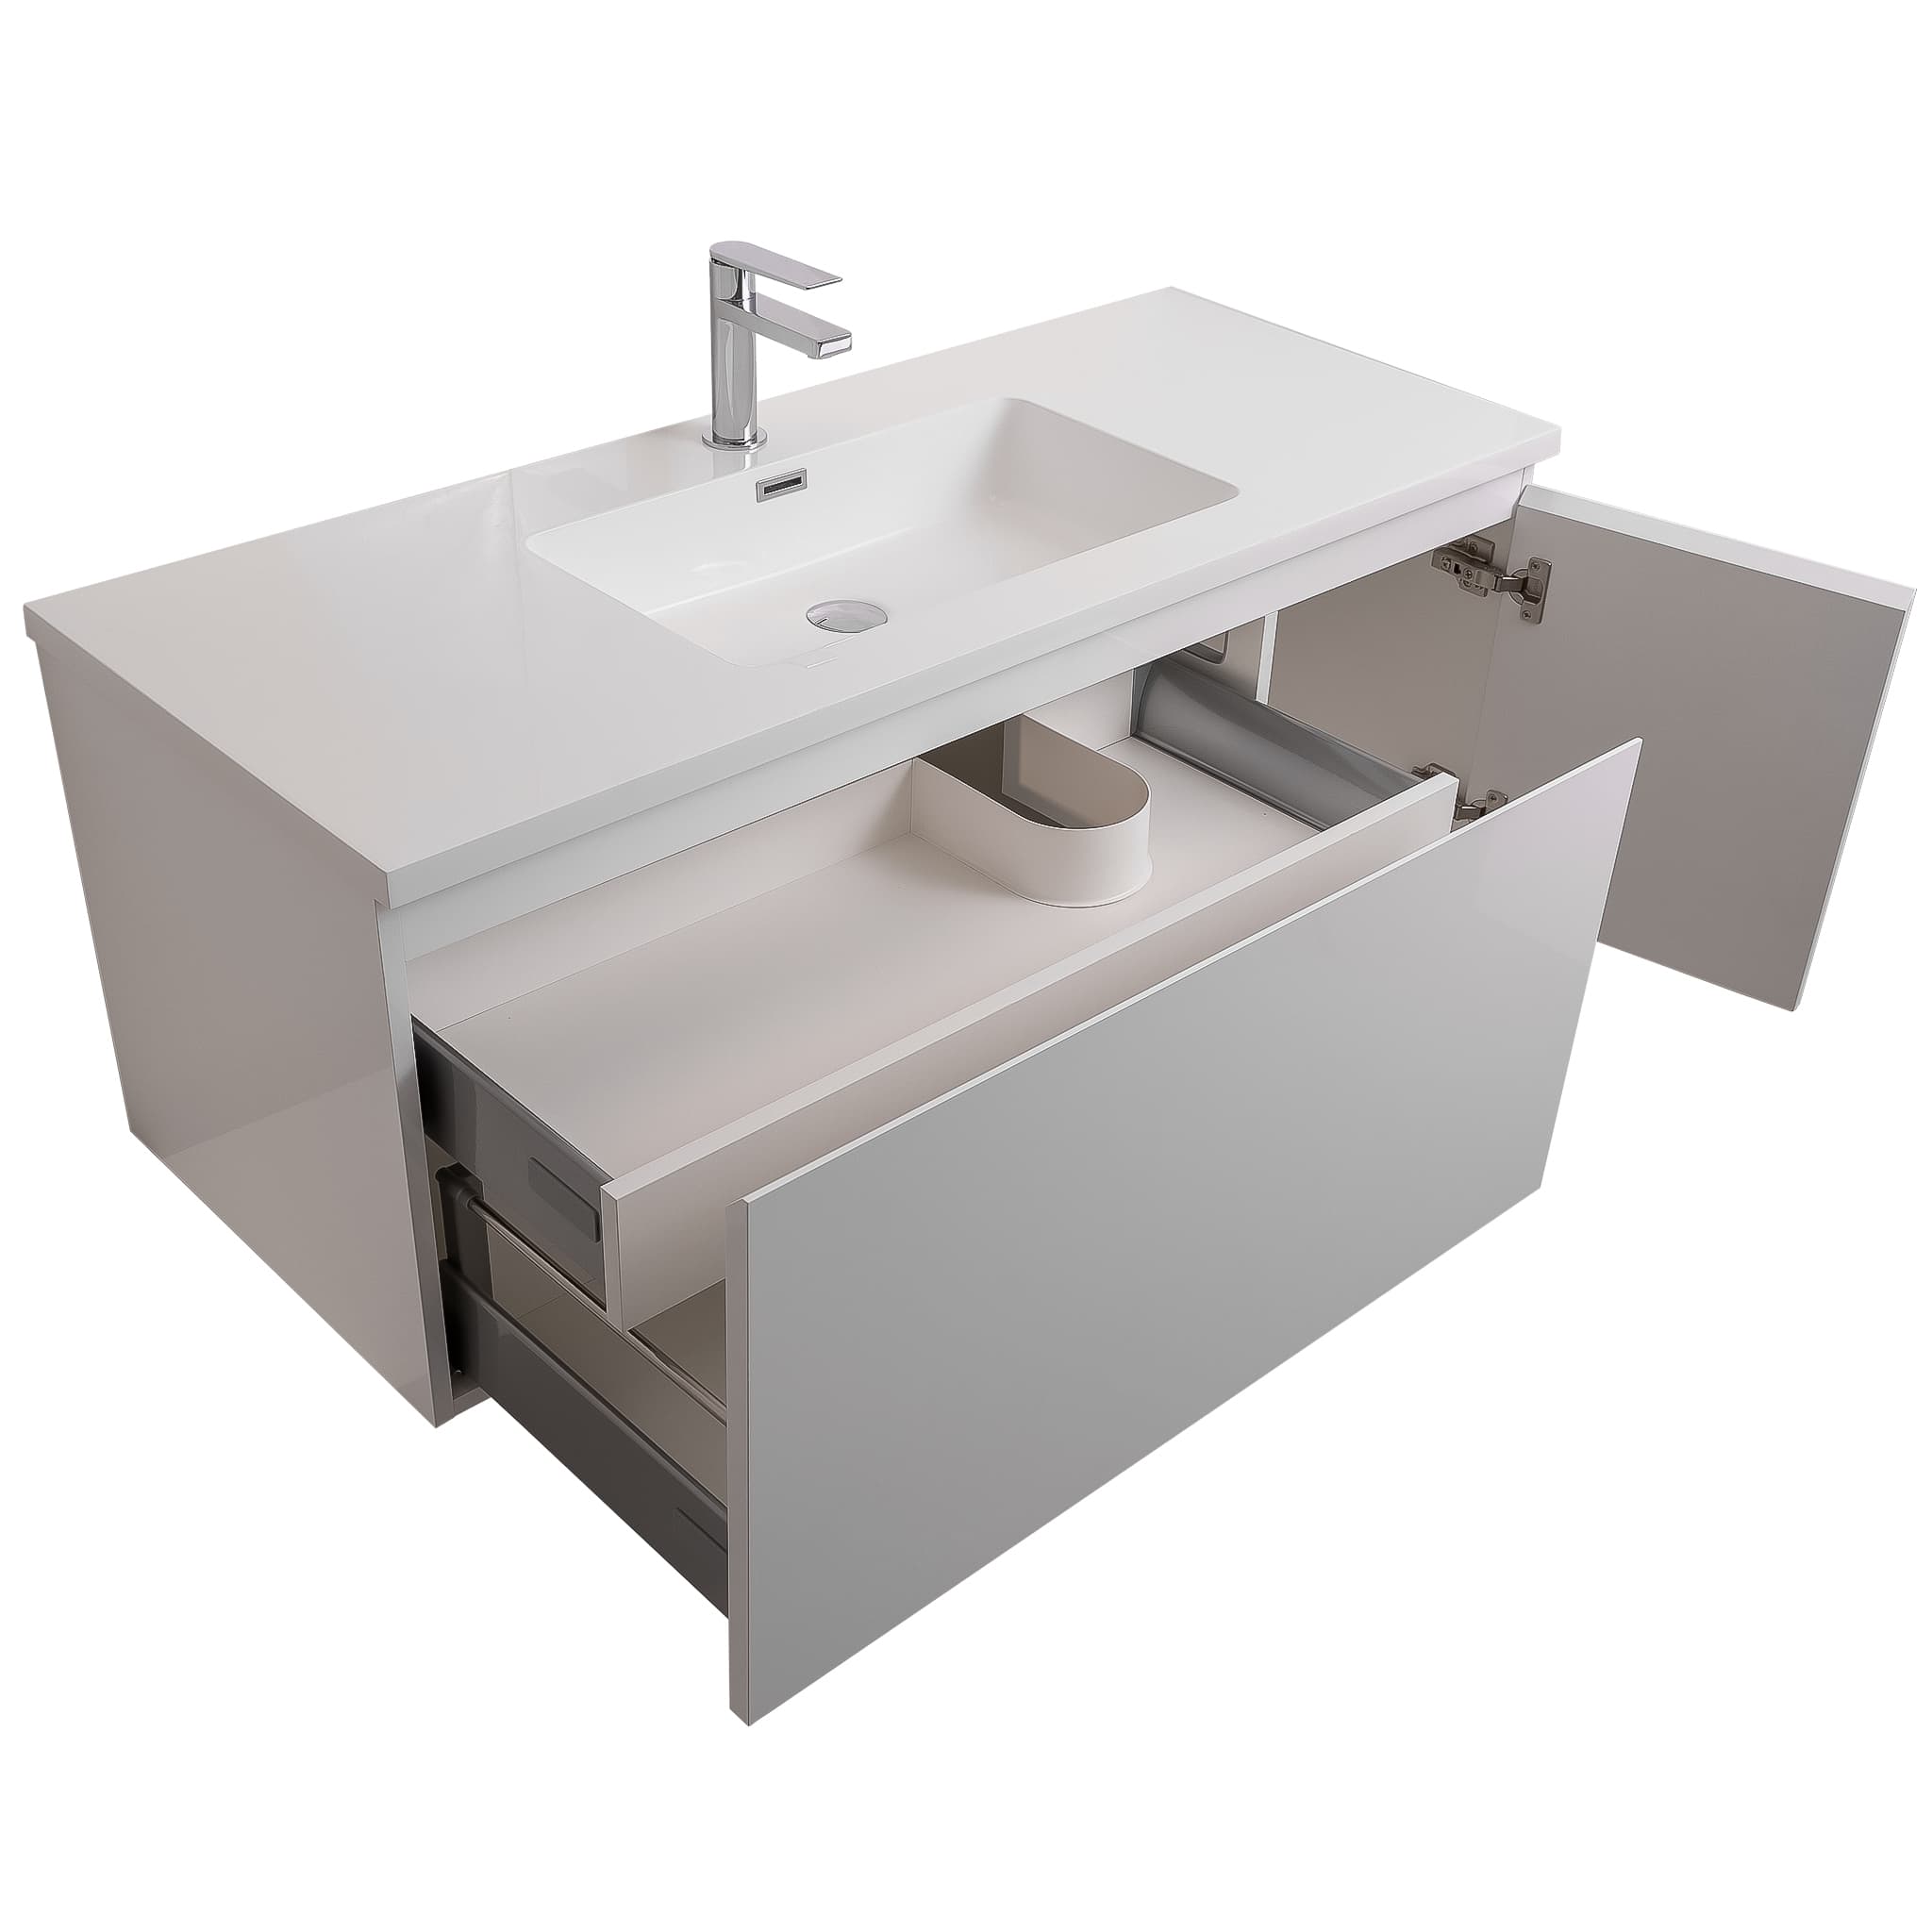 Venice 47.5 White High Gloss Cabinet, Square Cultured Marble Sink, Wall Mounted Modern Vanity Set